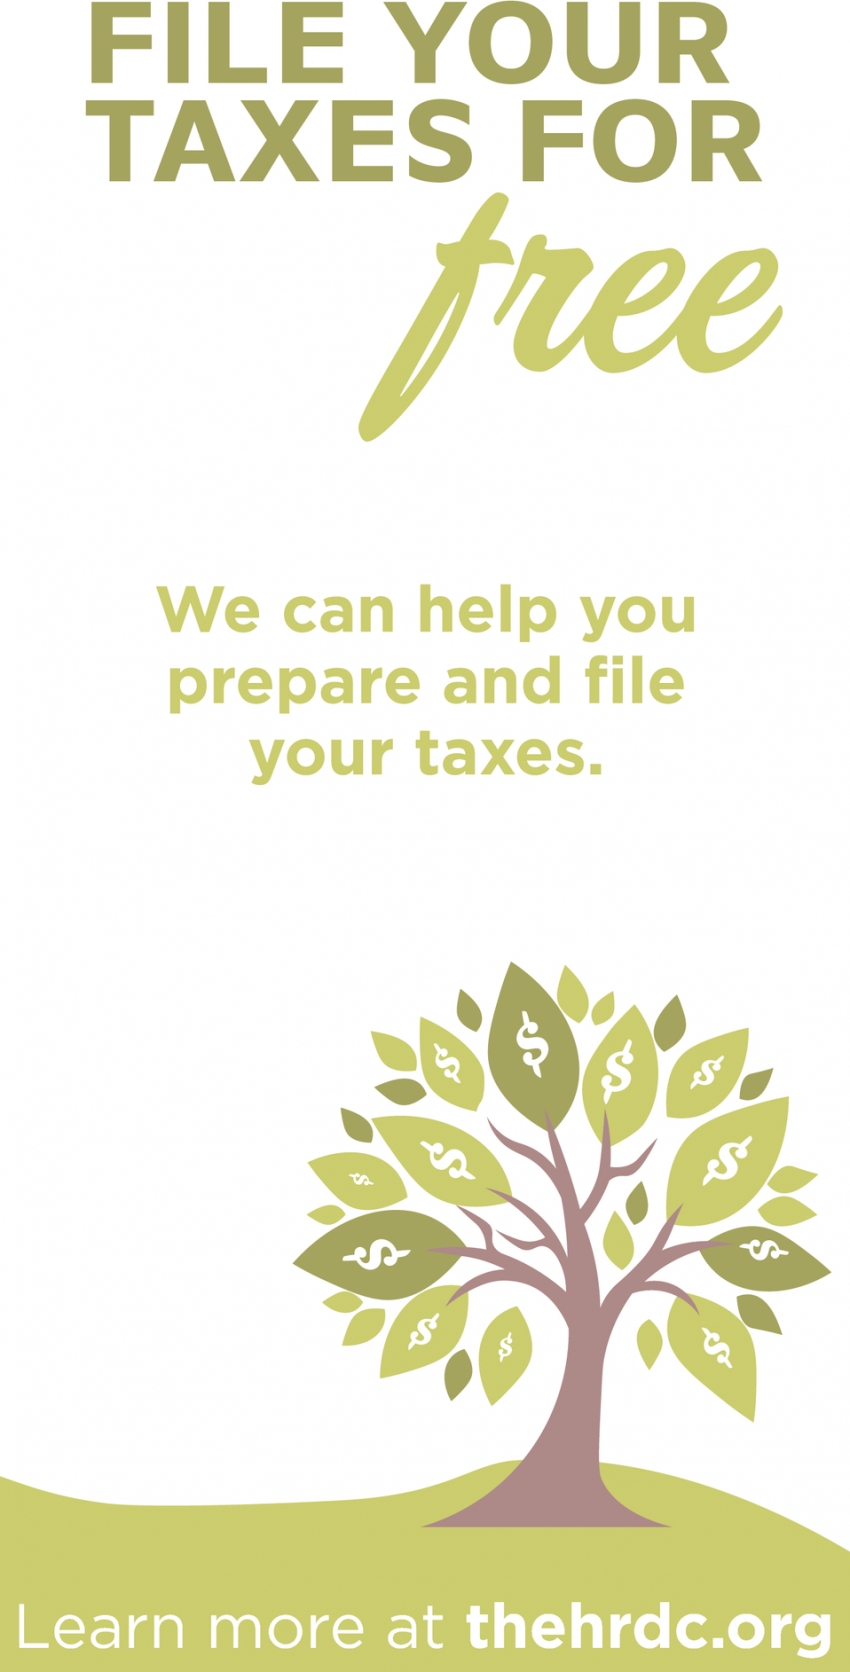 File Your Taxes for Free